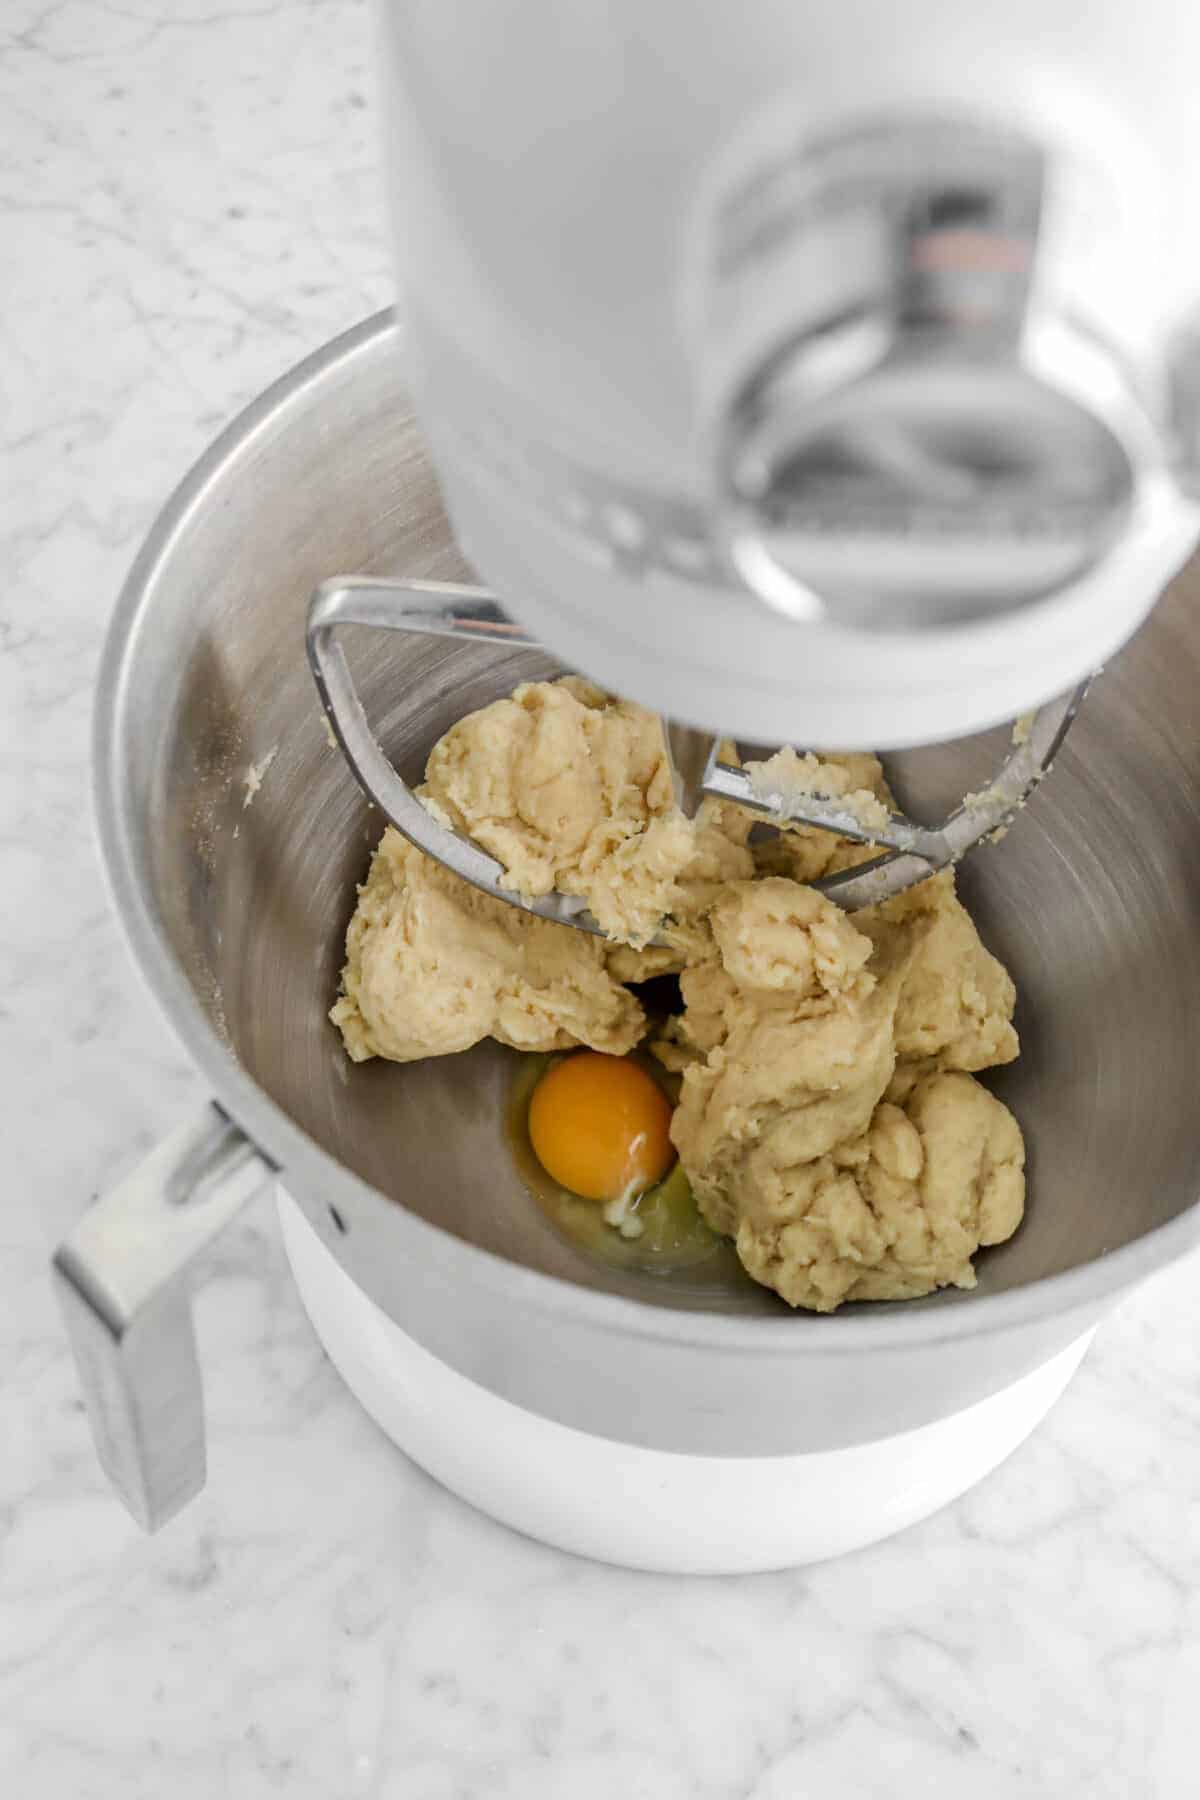 egg added to dough in mixer